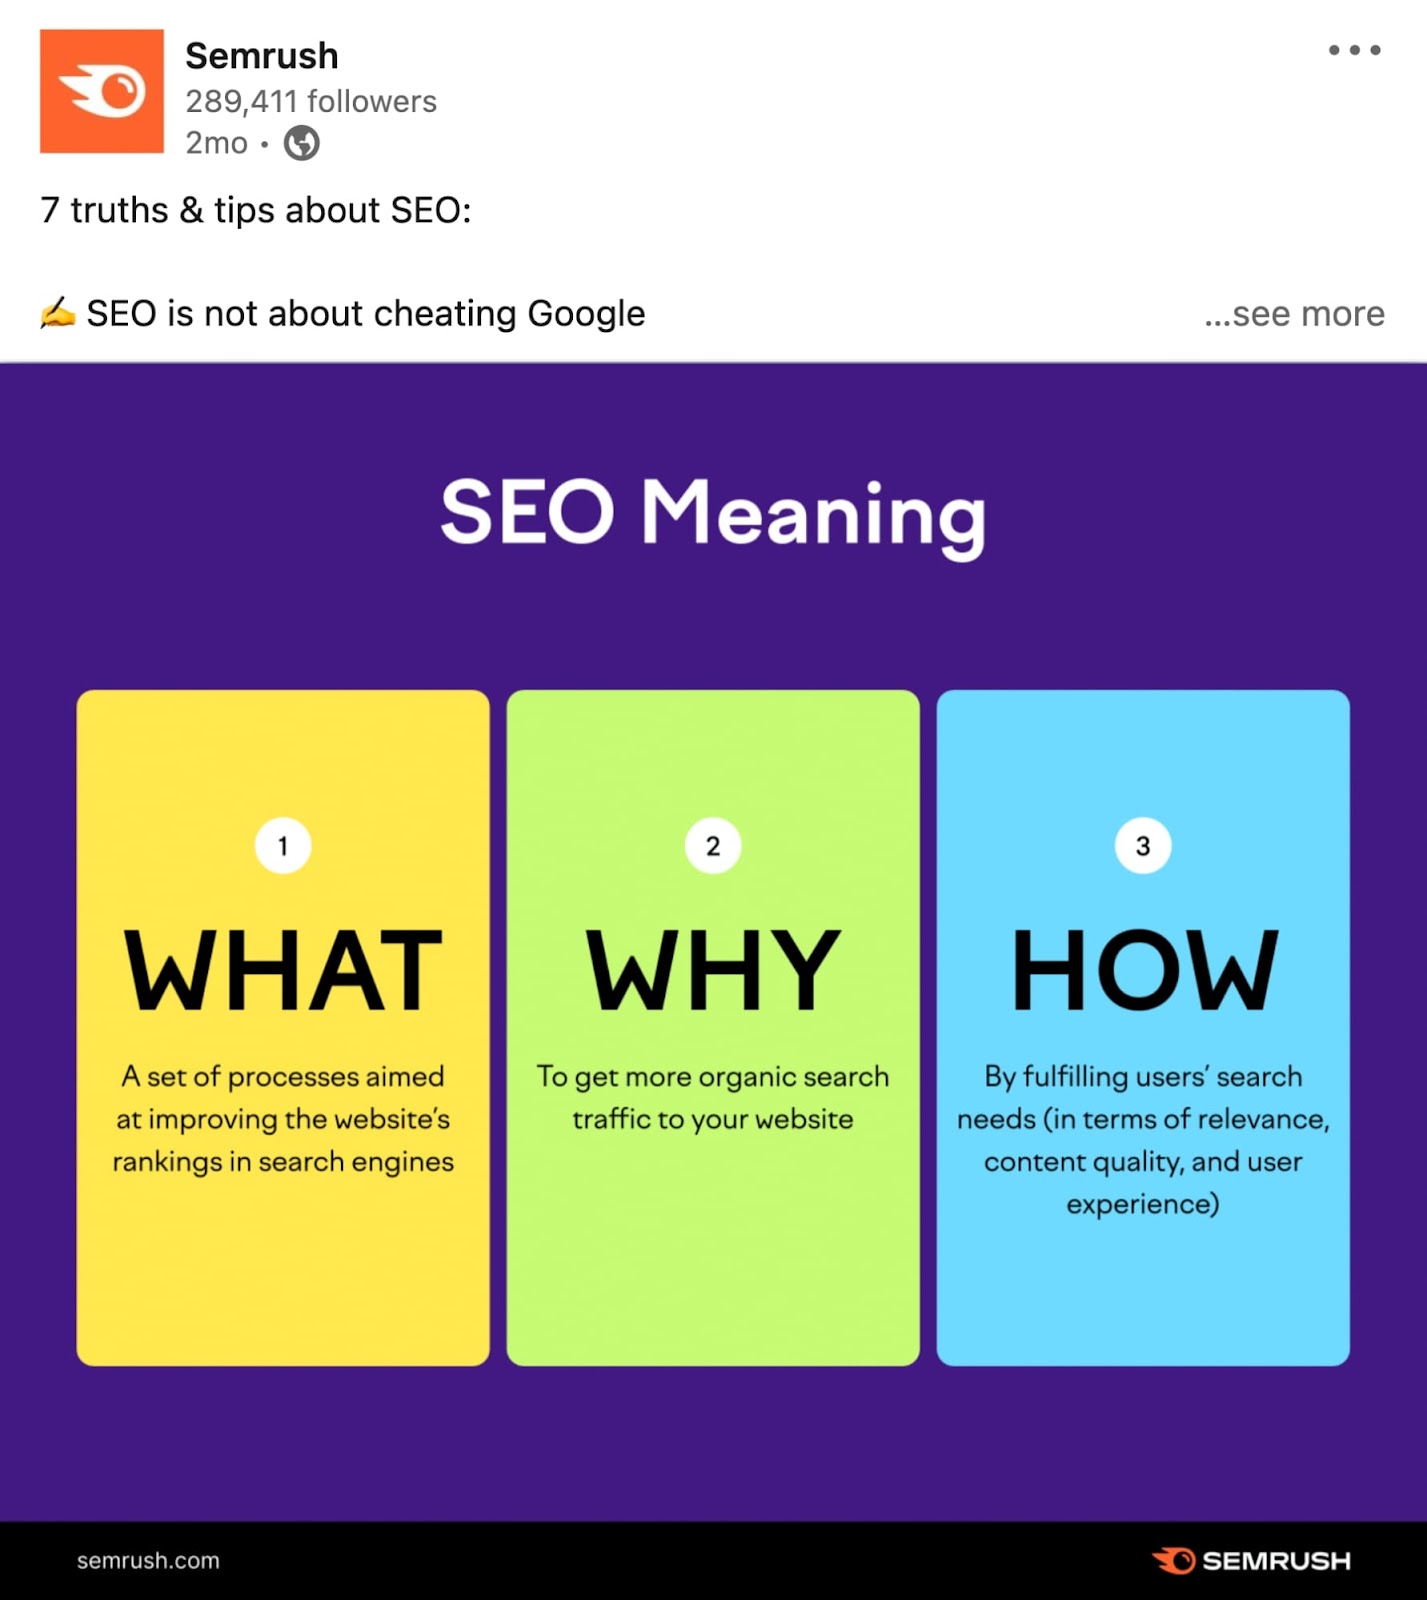 Semrush's LinkedIn post on "7 truths & tips about SEO" including an “SEO meaning” image